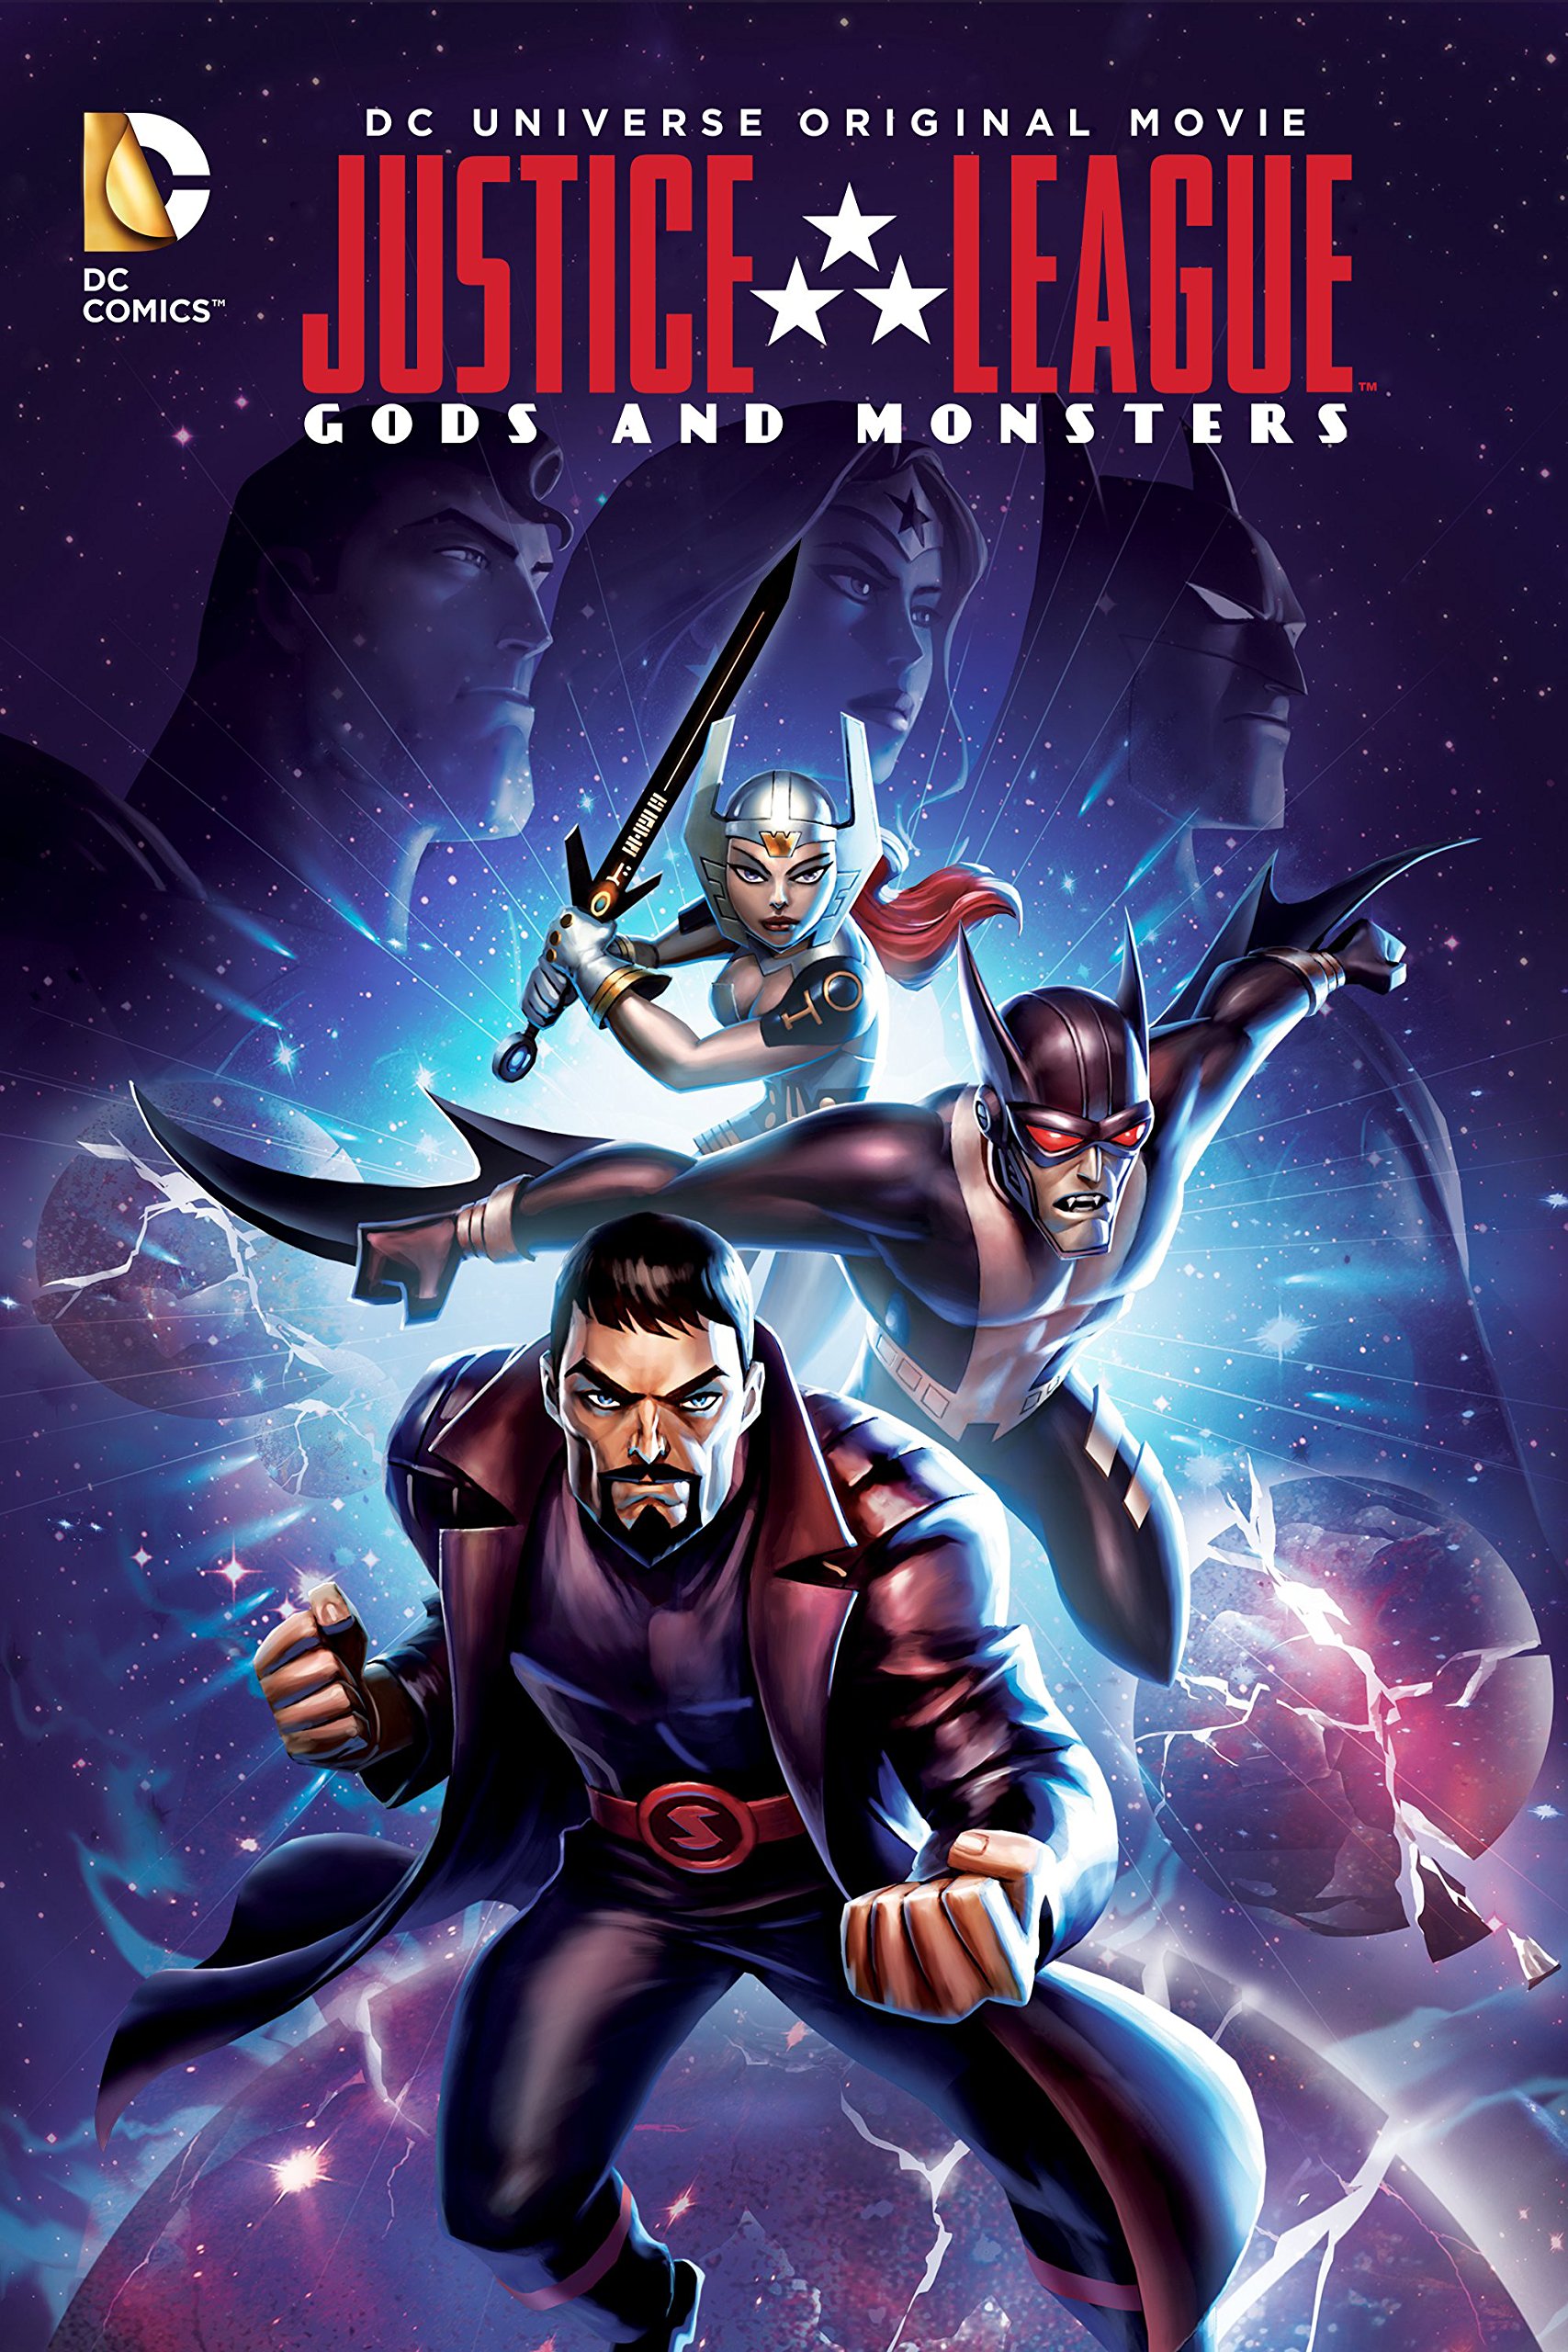 Justice League: Gods and Monsters best dc animated movies